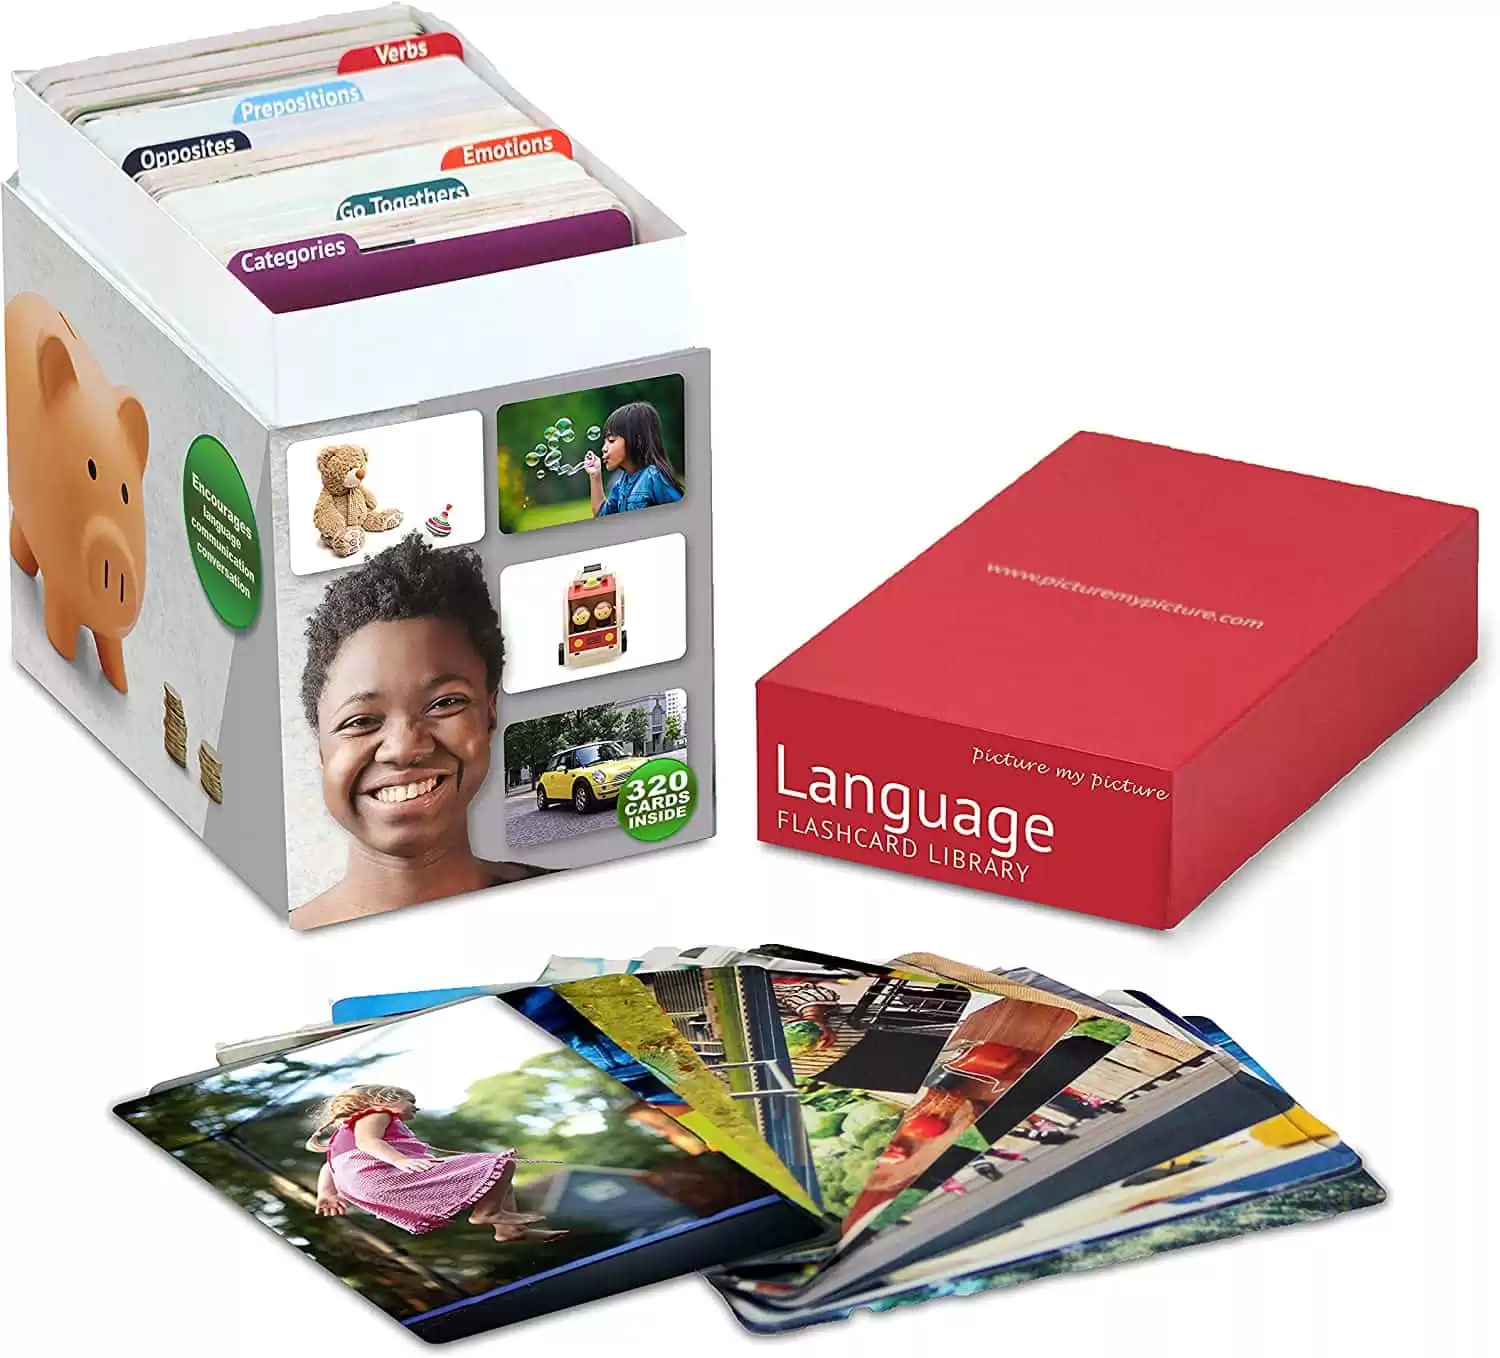 Language Flash Card Library | Emotions, Verbs, Prepositions, Categories, Go Togethers, Opposites Photo Cards